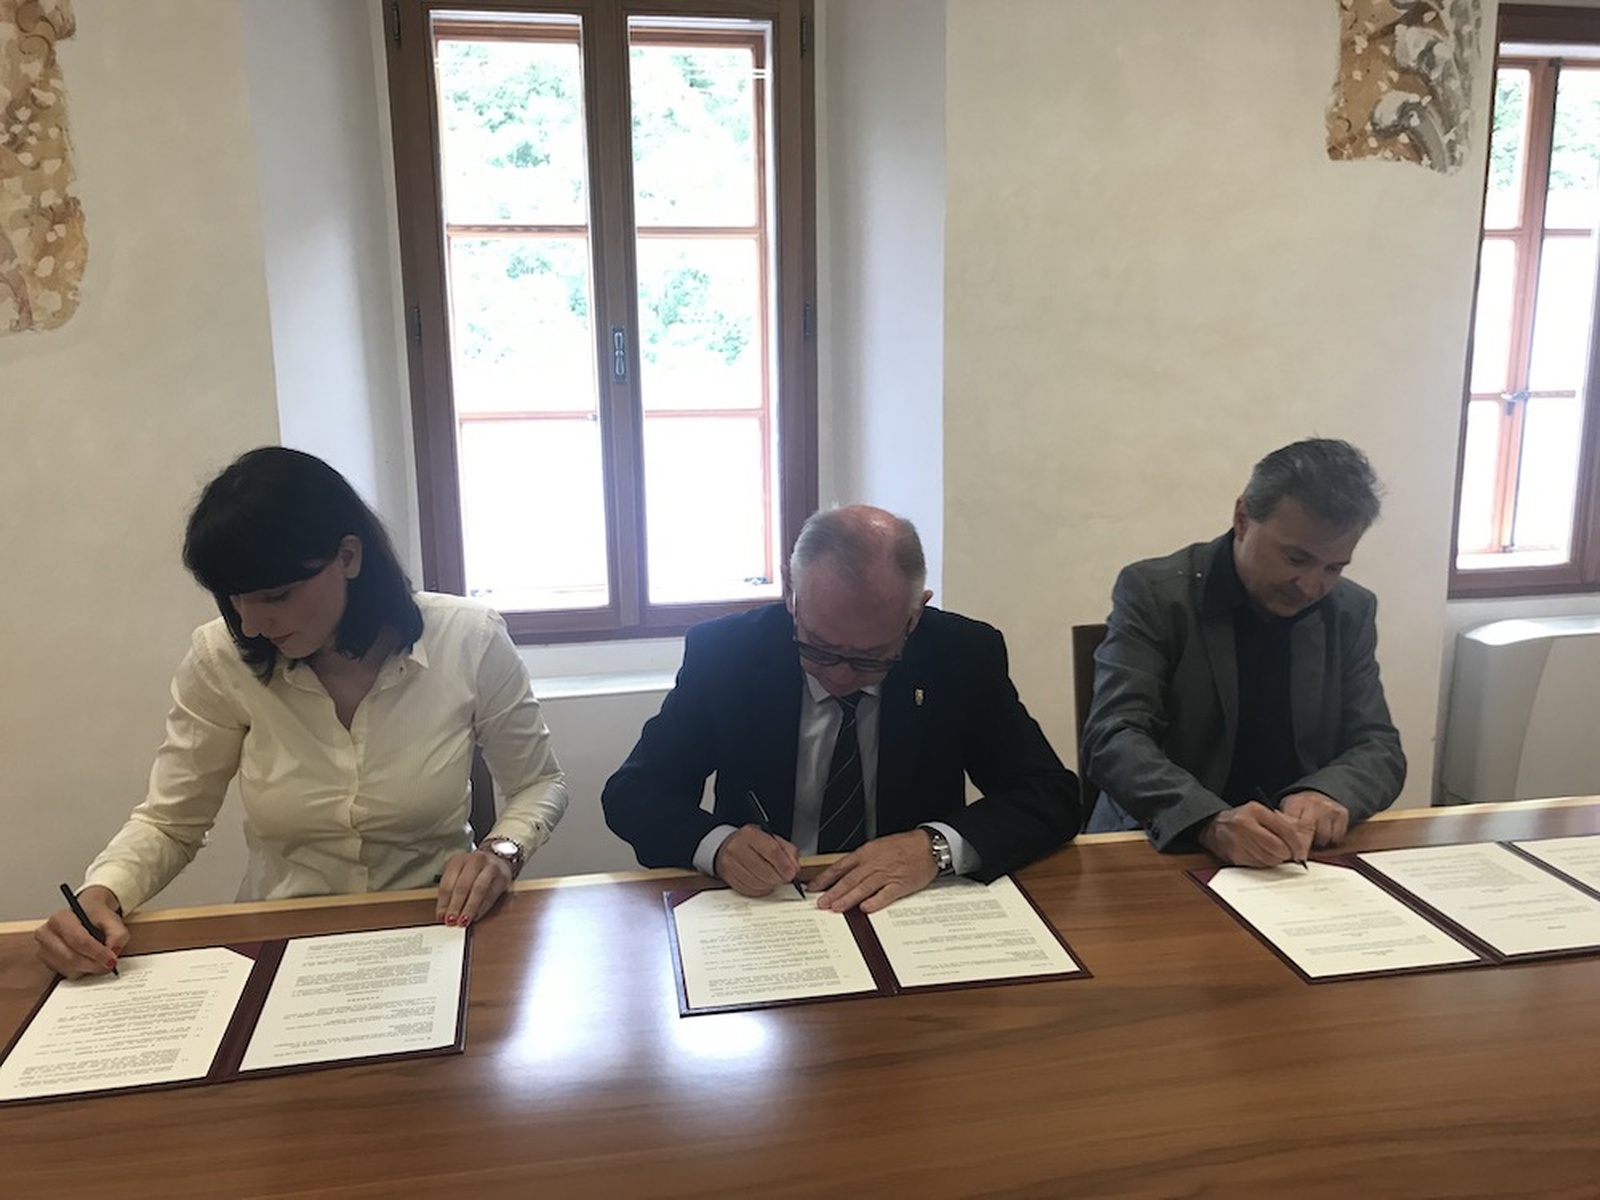 From left to right: Head of the CES Institute, Nina Gramc (holding a Master’s degree in engineering), Rector of the University of Nova Gorica, Prof. Dr. Danilo Zavrtanik and Inventor of the Patent, Prof. Dr. Matjaž Valant.